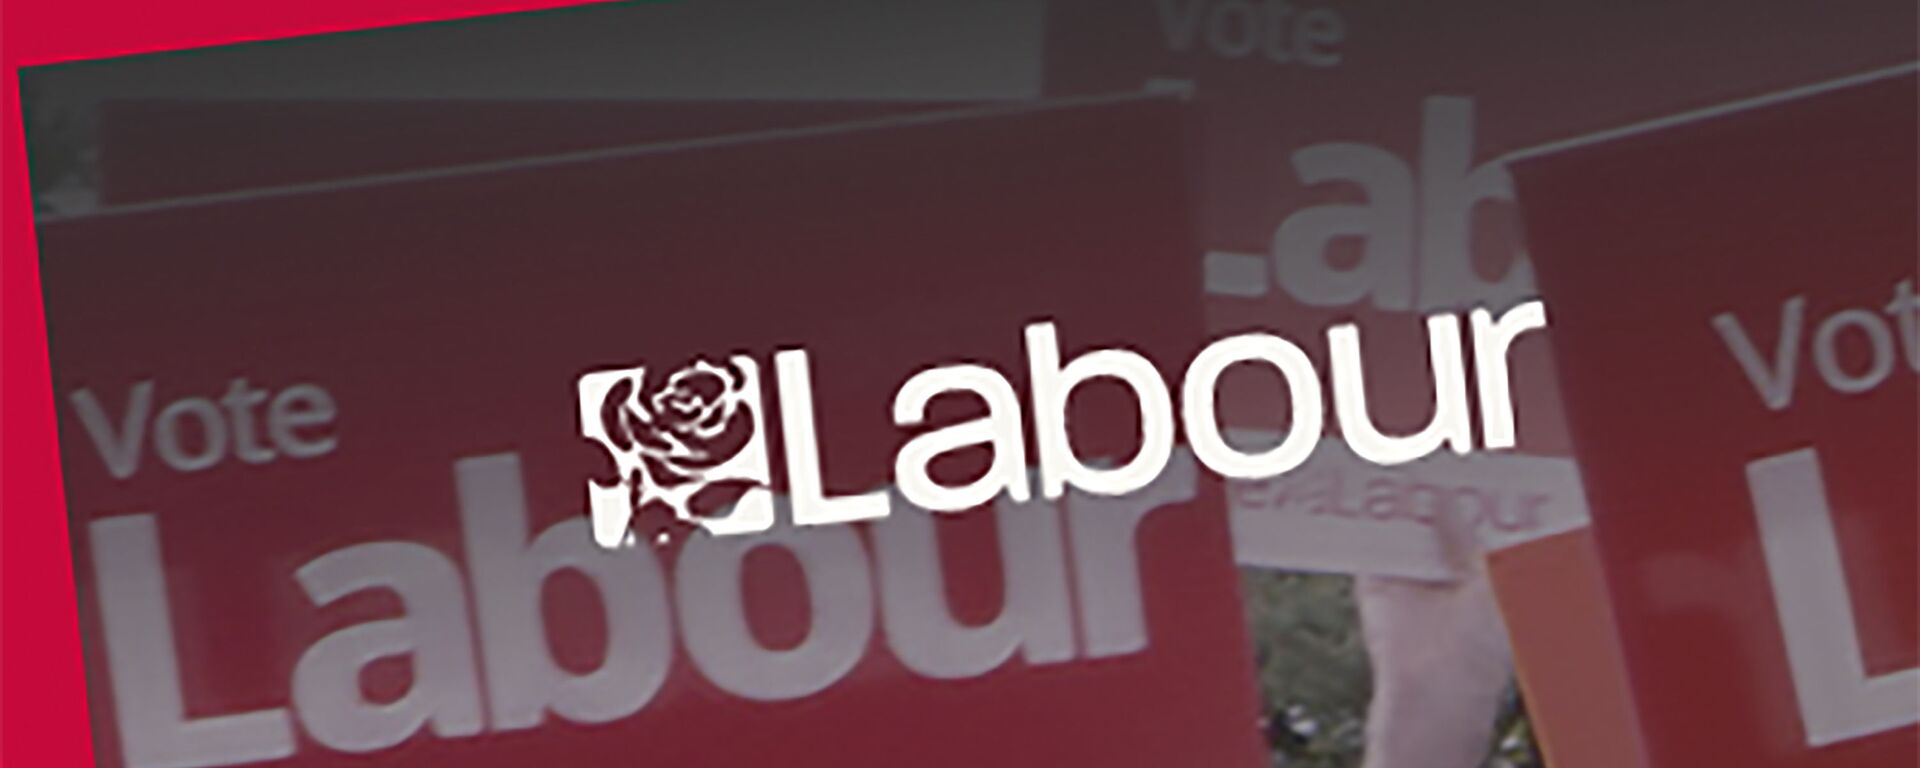 Screen-grab taken from Britain's Labour Party internet site showing the party logo Tuesday Nov. 12, 2019.  - Sputnik International, 1920, 19.01.2021